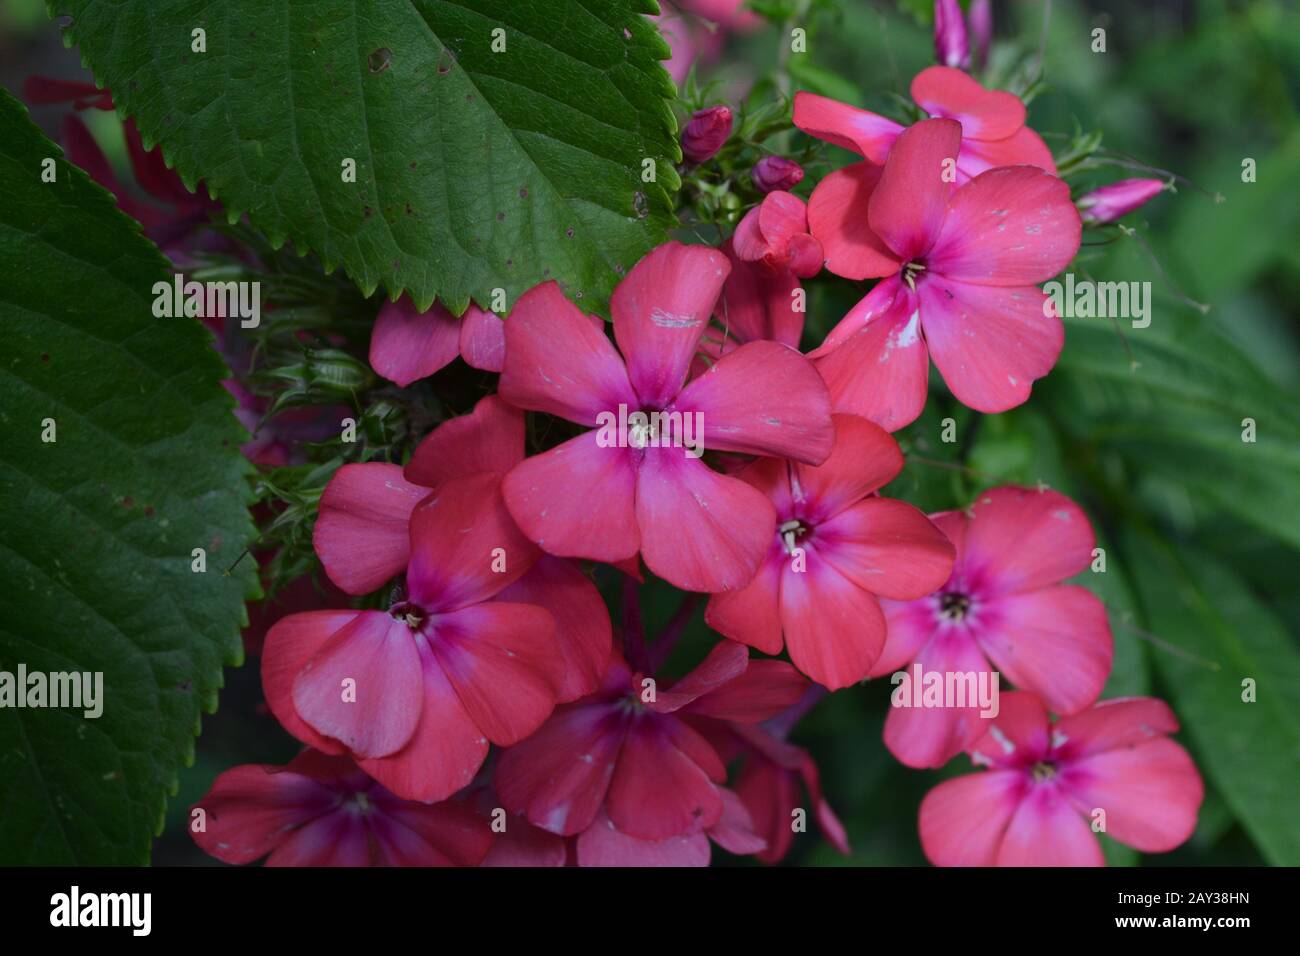 Phlox. Polemoniaceae. Beautiful inflorescence. Flowers pink. Flowerbed. Garden. Floriculture. On blurred background. Close-up. Horizontal photo Stock Photo